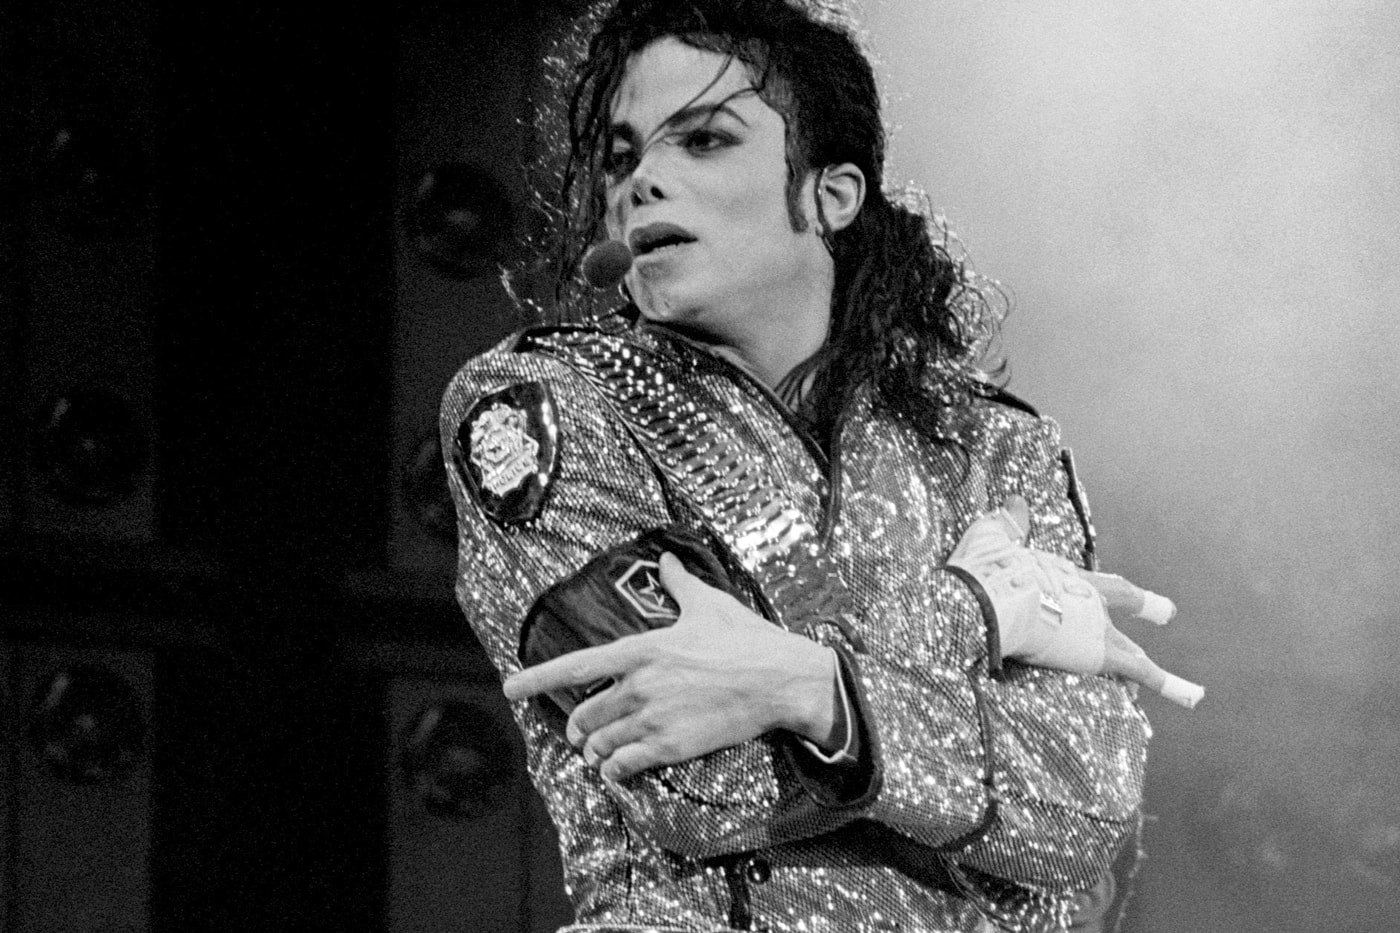 More 'New' Music From Michael Jackson To Be Released